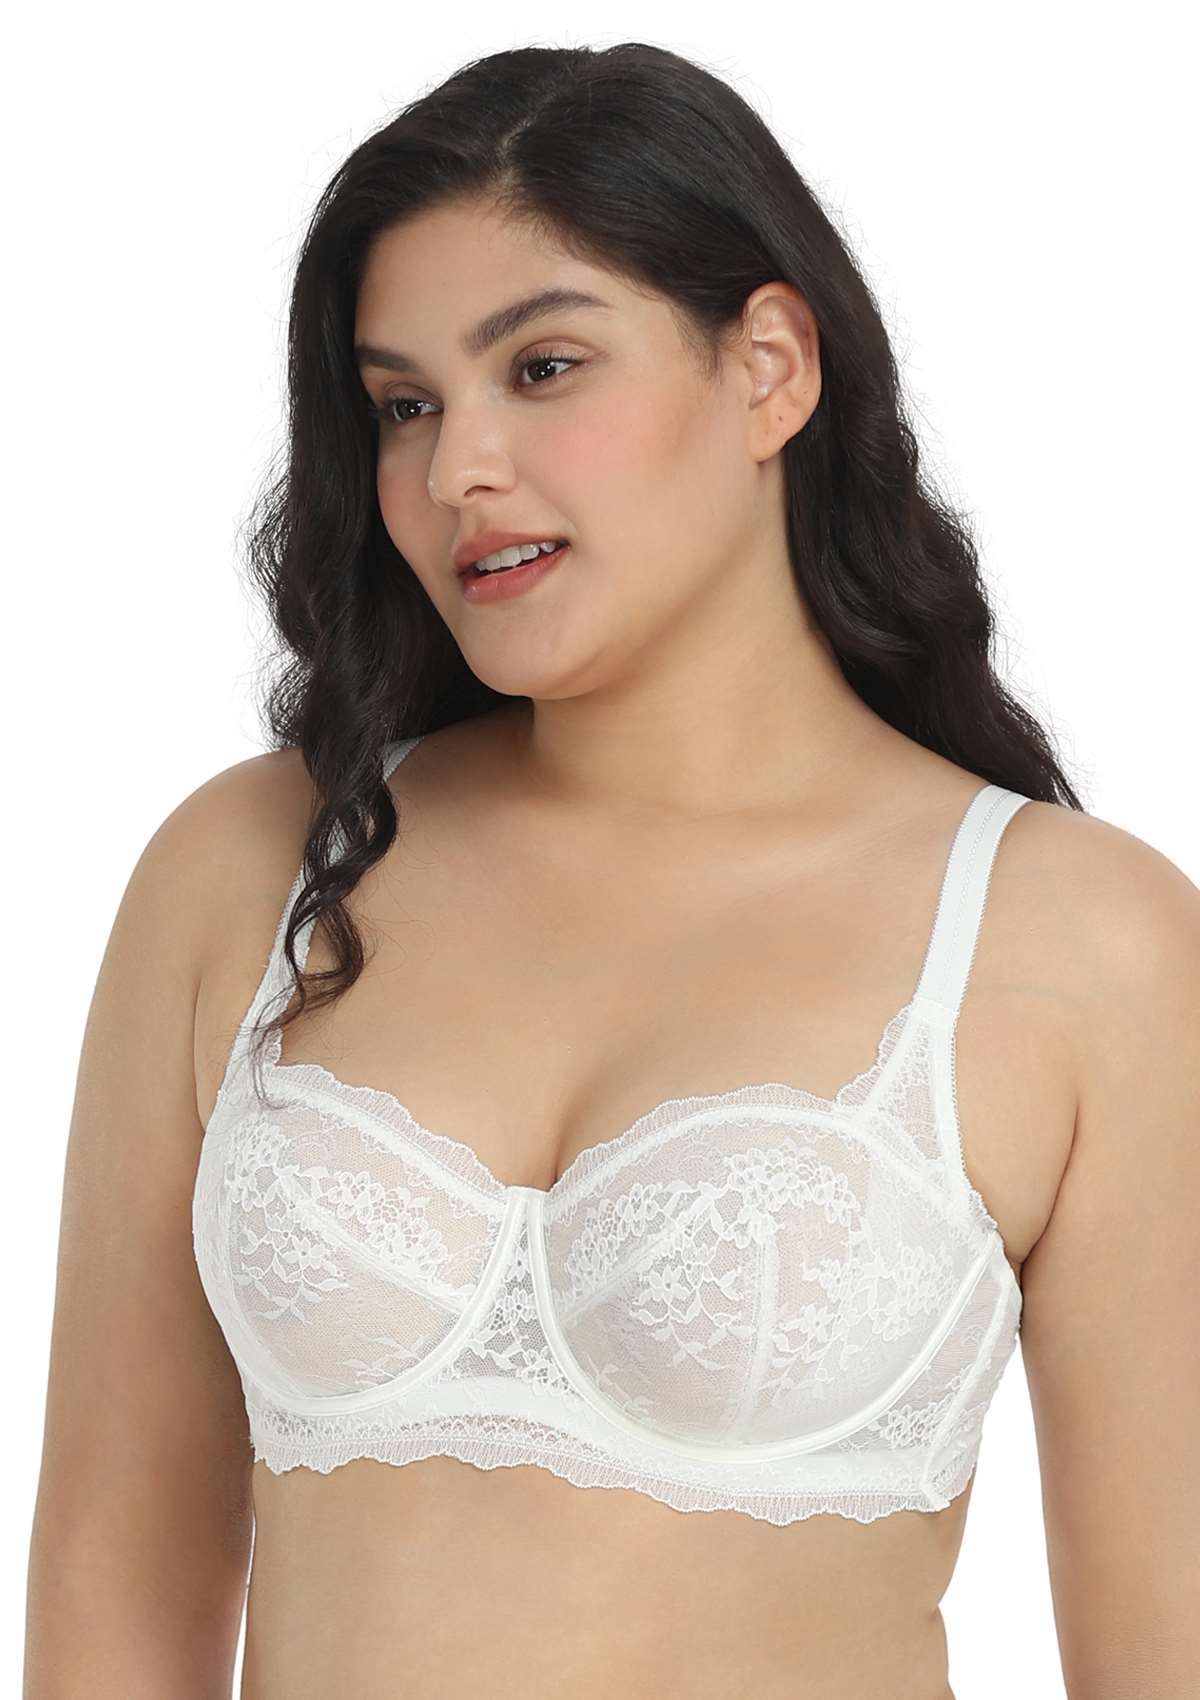 HSIA I Do Floral Lace Bridal Balconette Beautiful Bra For Special Day - Burgundy / 38 / DDD/F